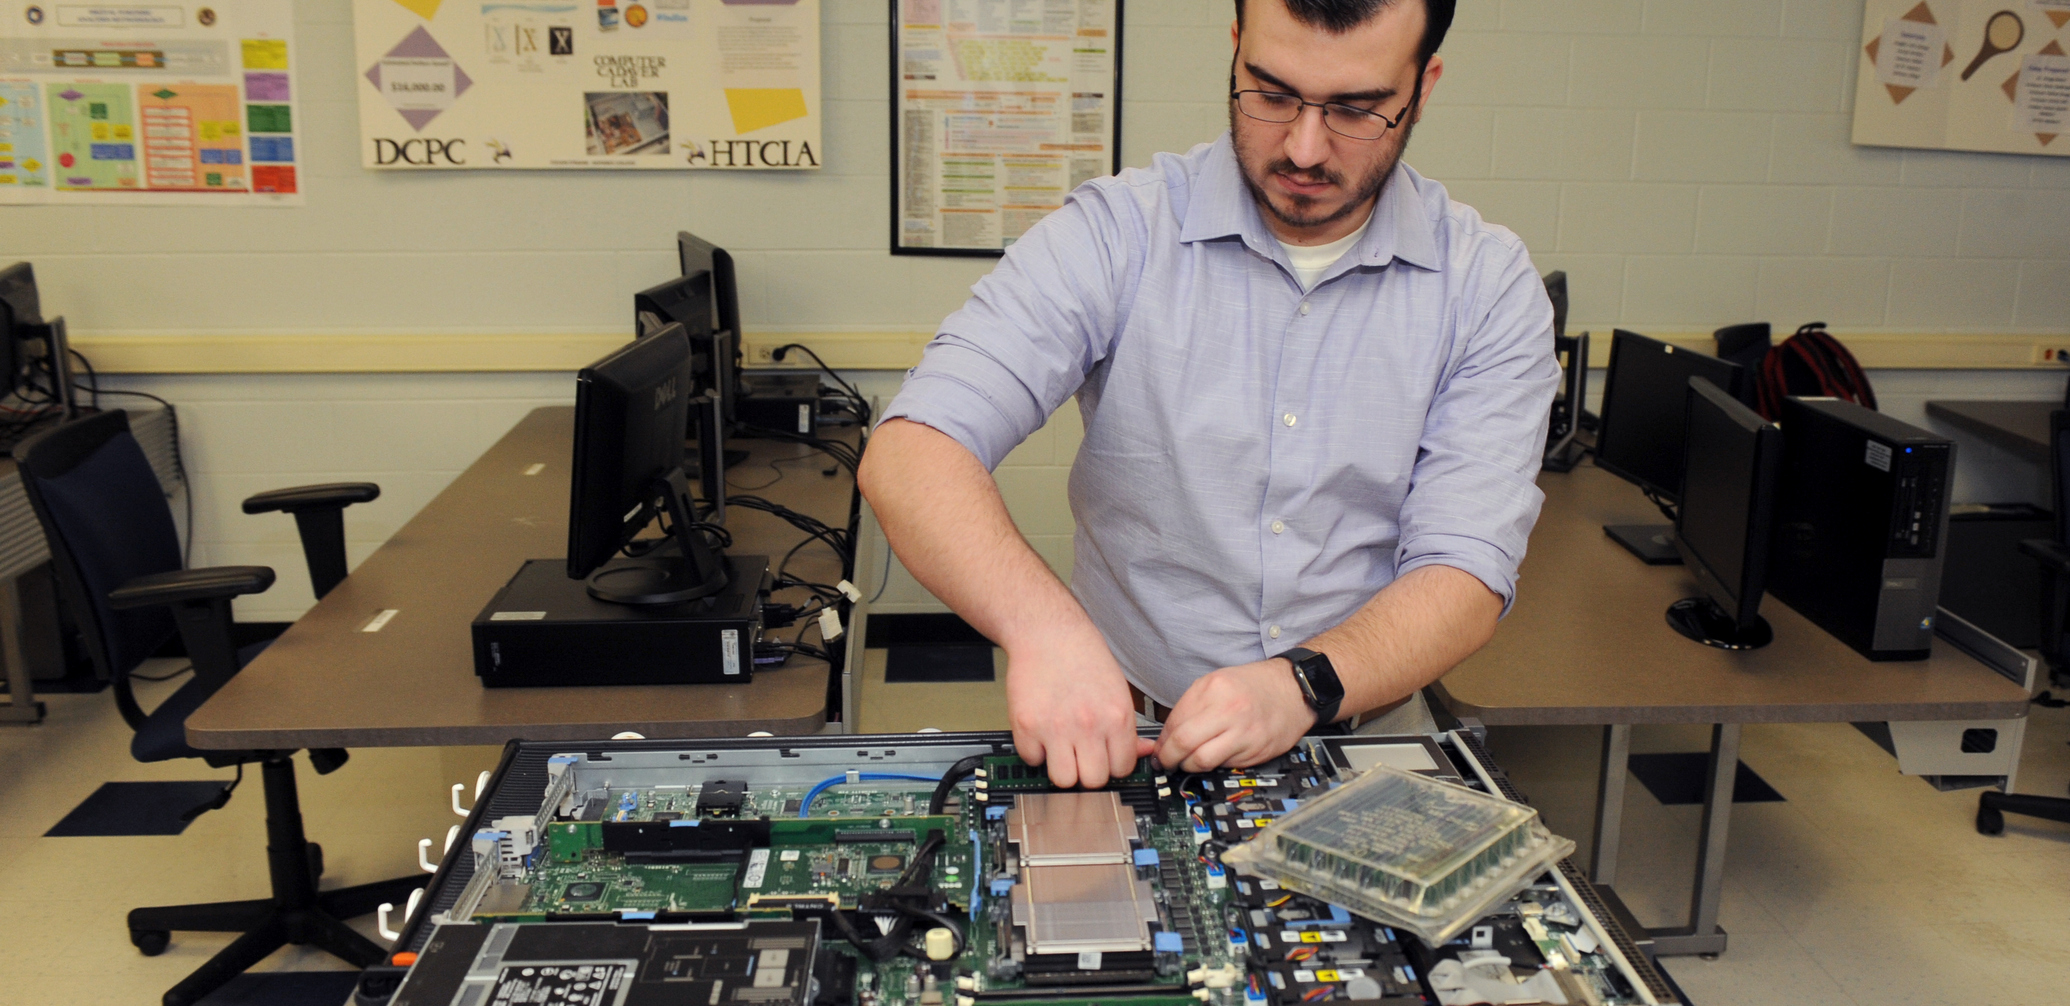 Student working on the inside of a server